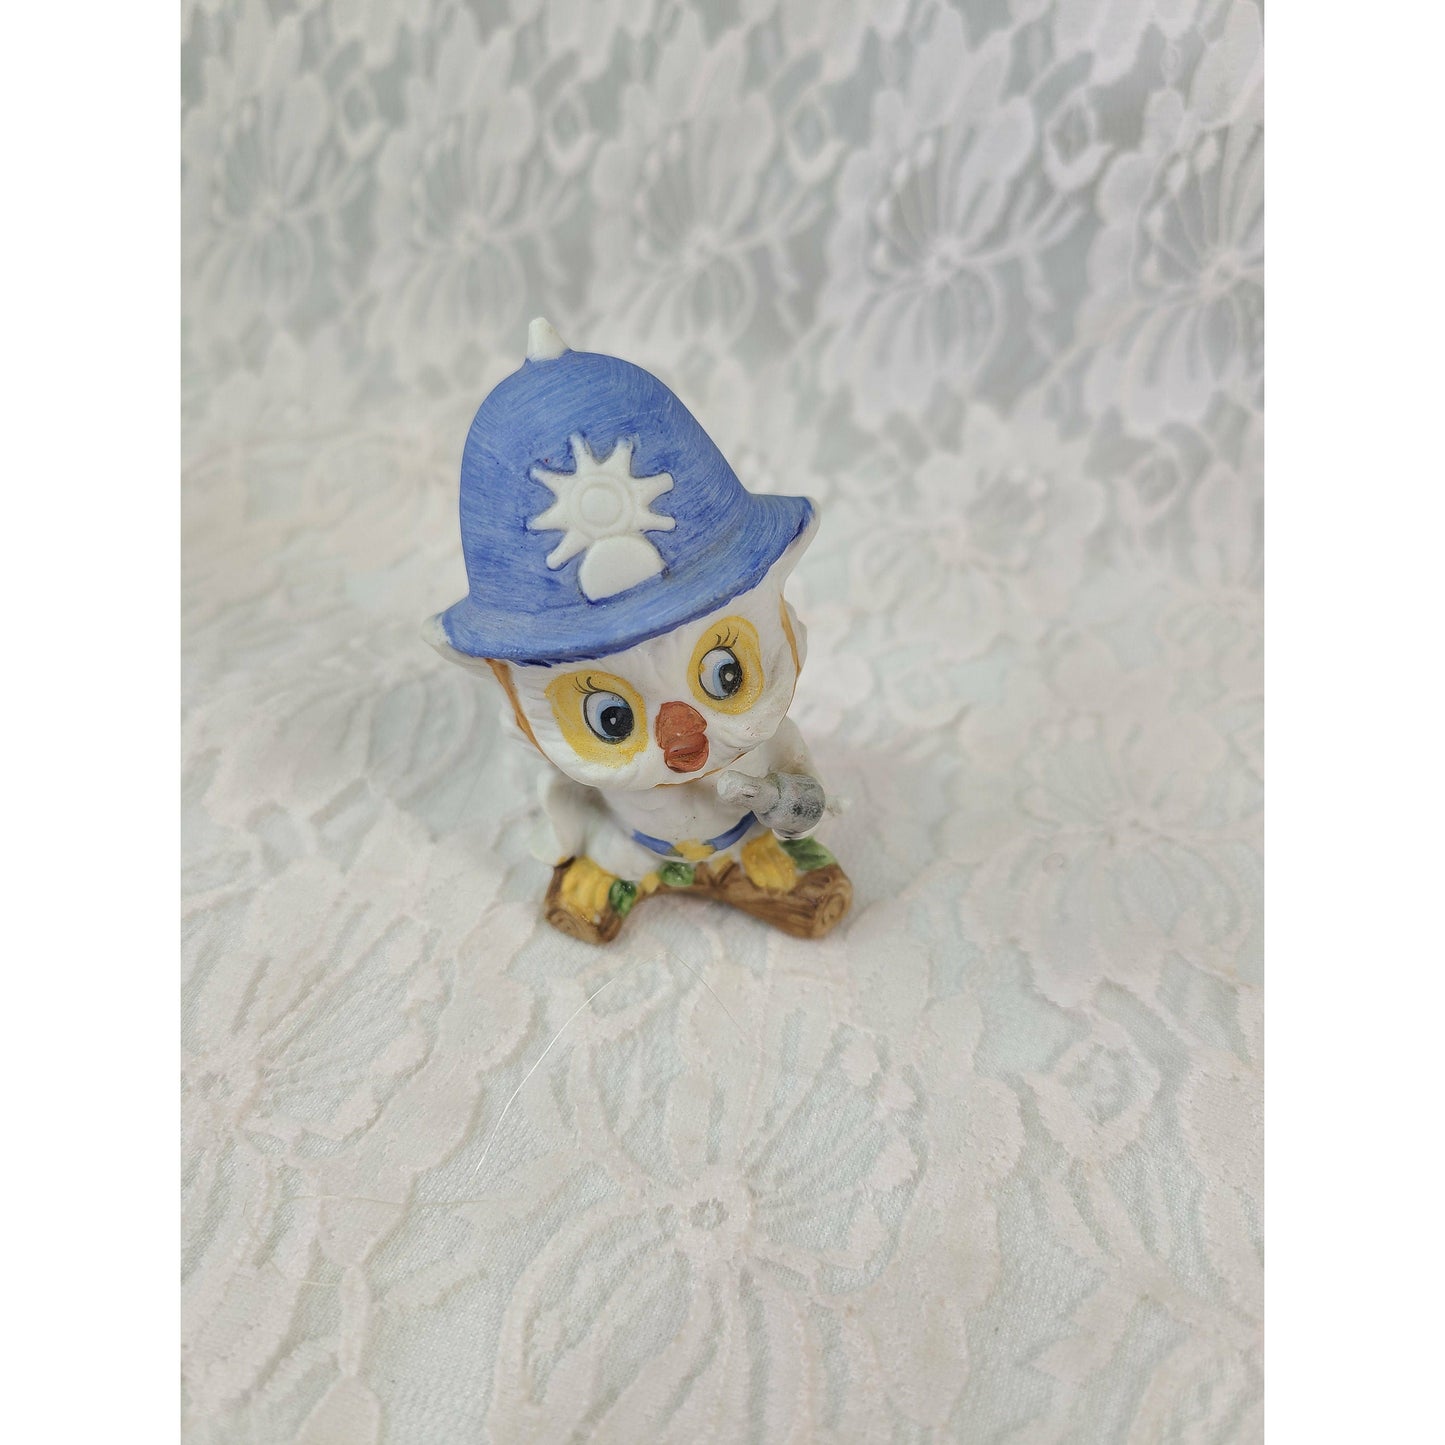 Vintage Bisque Porcelain Owl Figurine ~ London Bobby Beat Cop ~ Keystone Cop Owl with Pistol and Tall Cap ~ 3" Tall